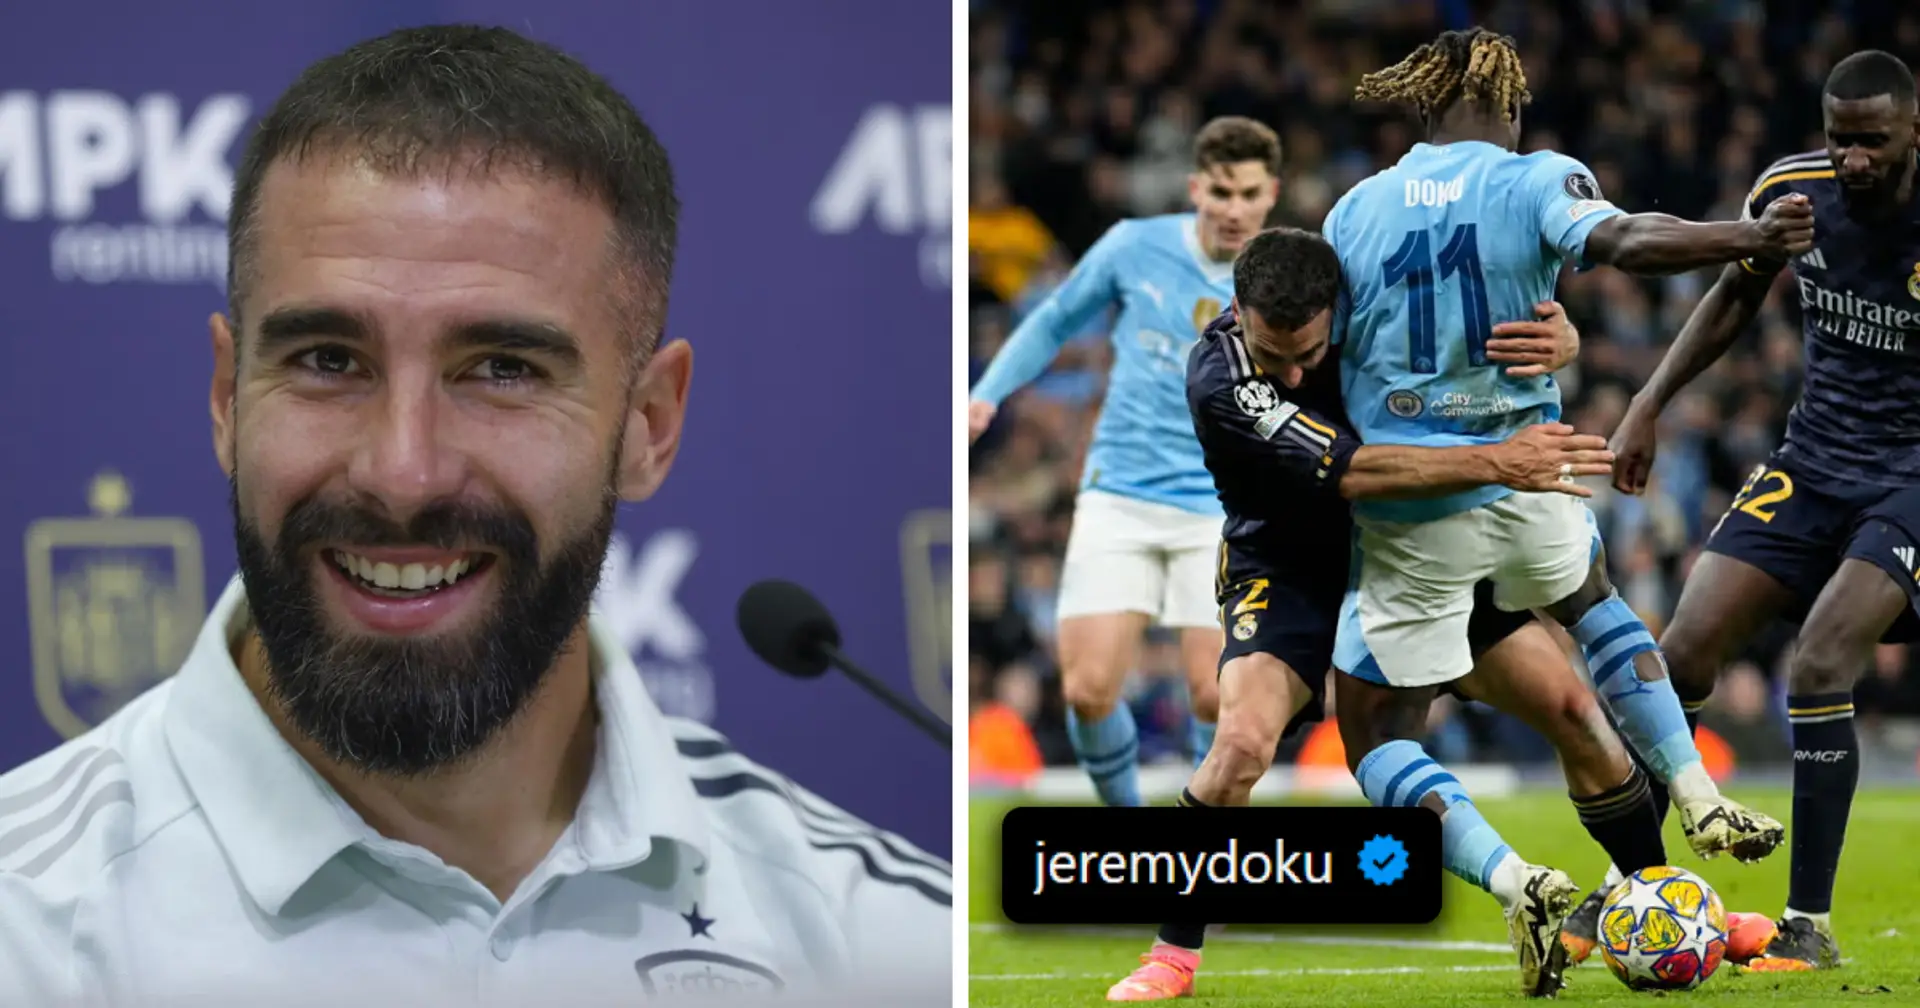 'This is what they’ve been calling pocketing': Man City fans react to Doku's photo on Instagram story 